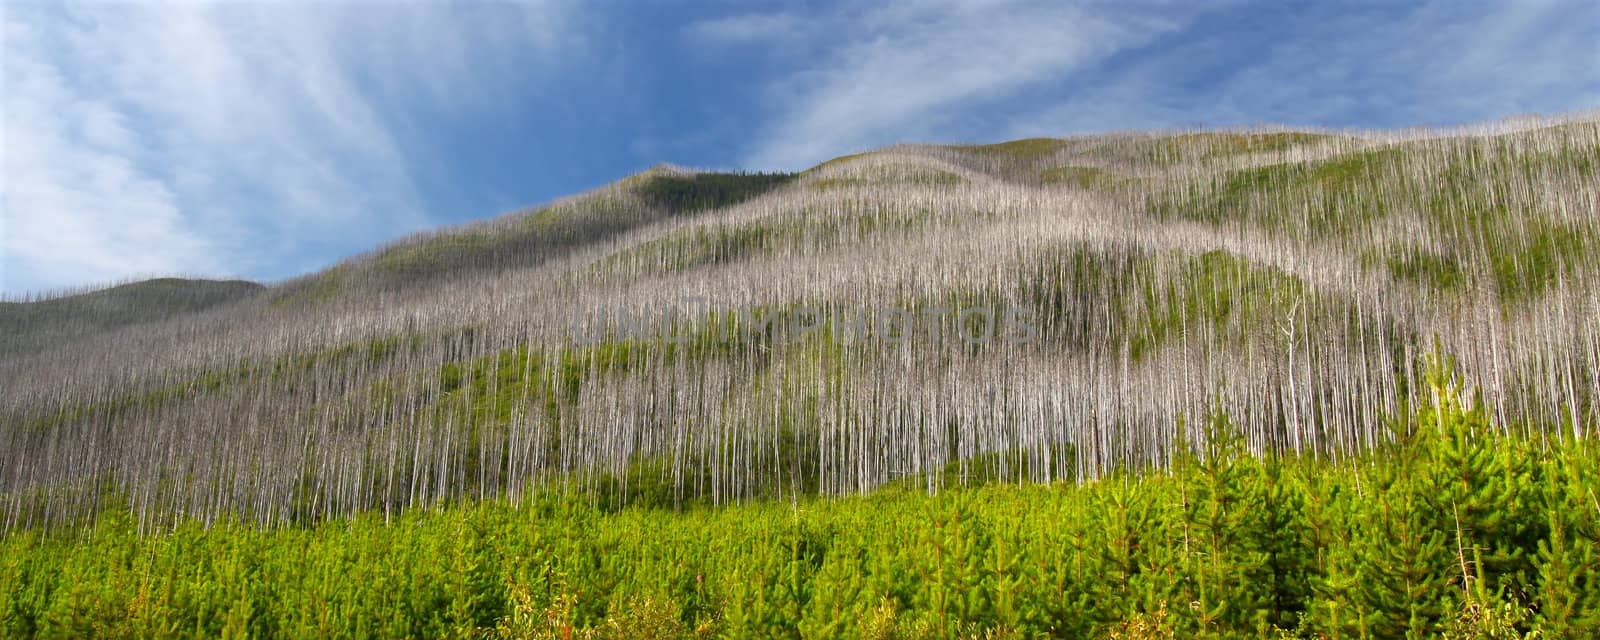 Small pines emerge in the wake of a forest fire in the Flathead National Forest of Montana.